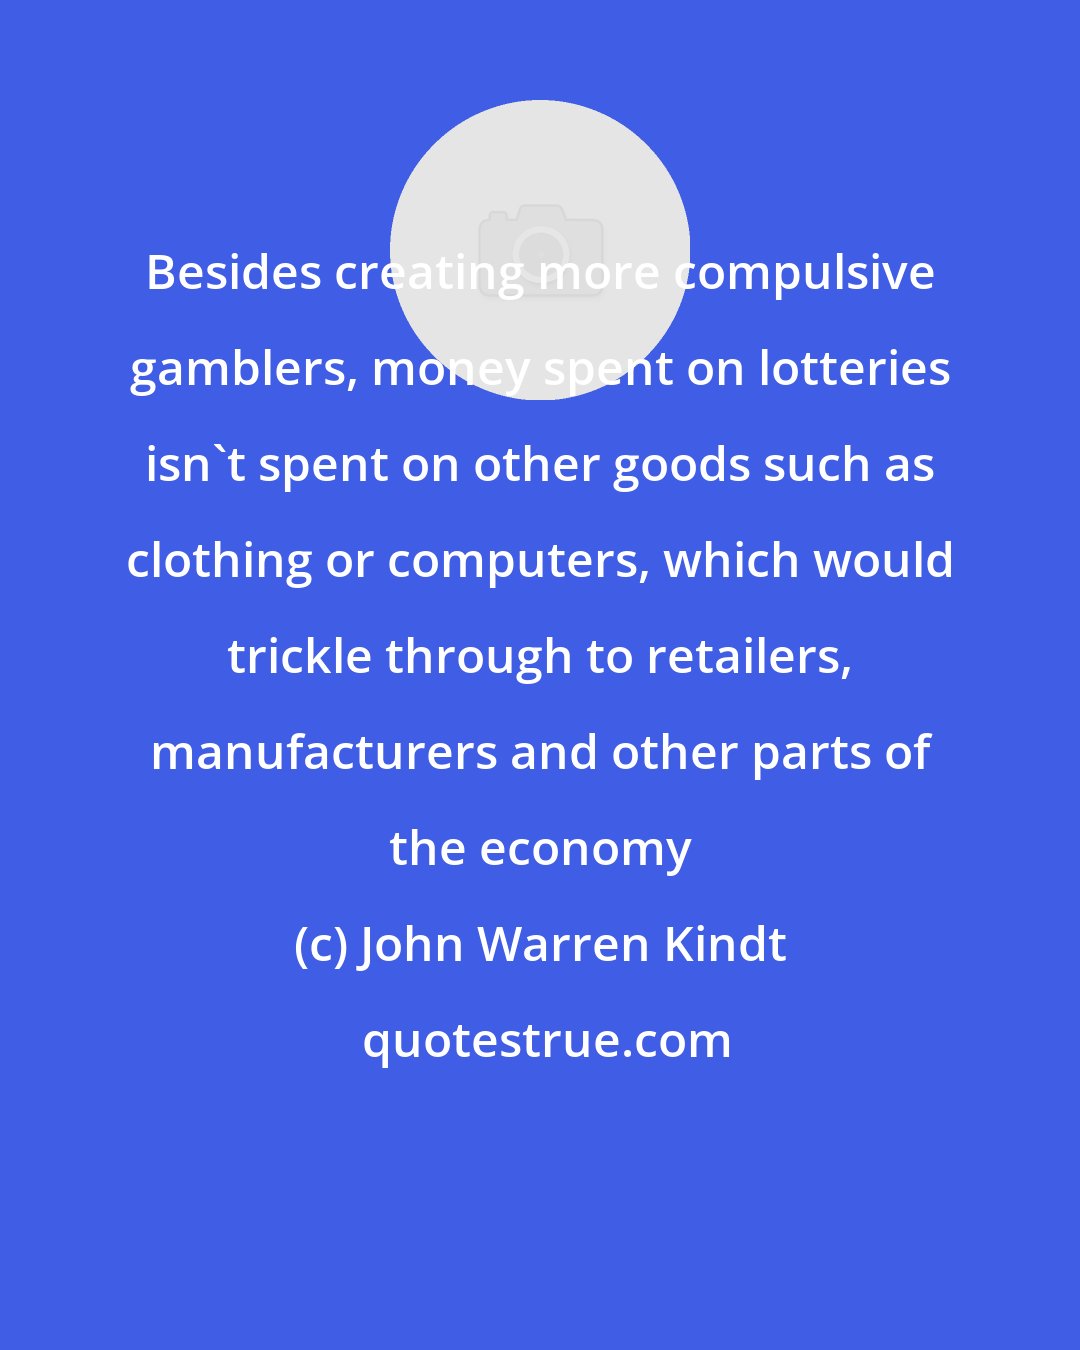 John Warren Kindt: Besides creating more compulsive gamblers, money spent on lotteries isn't spent on other goods such as clothing or computers, which would trickle through to retailers, manufacturers and other parts of the economy